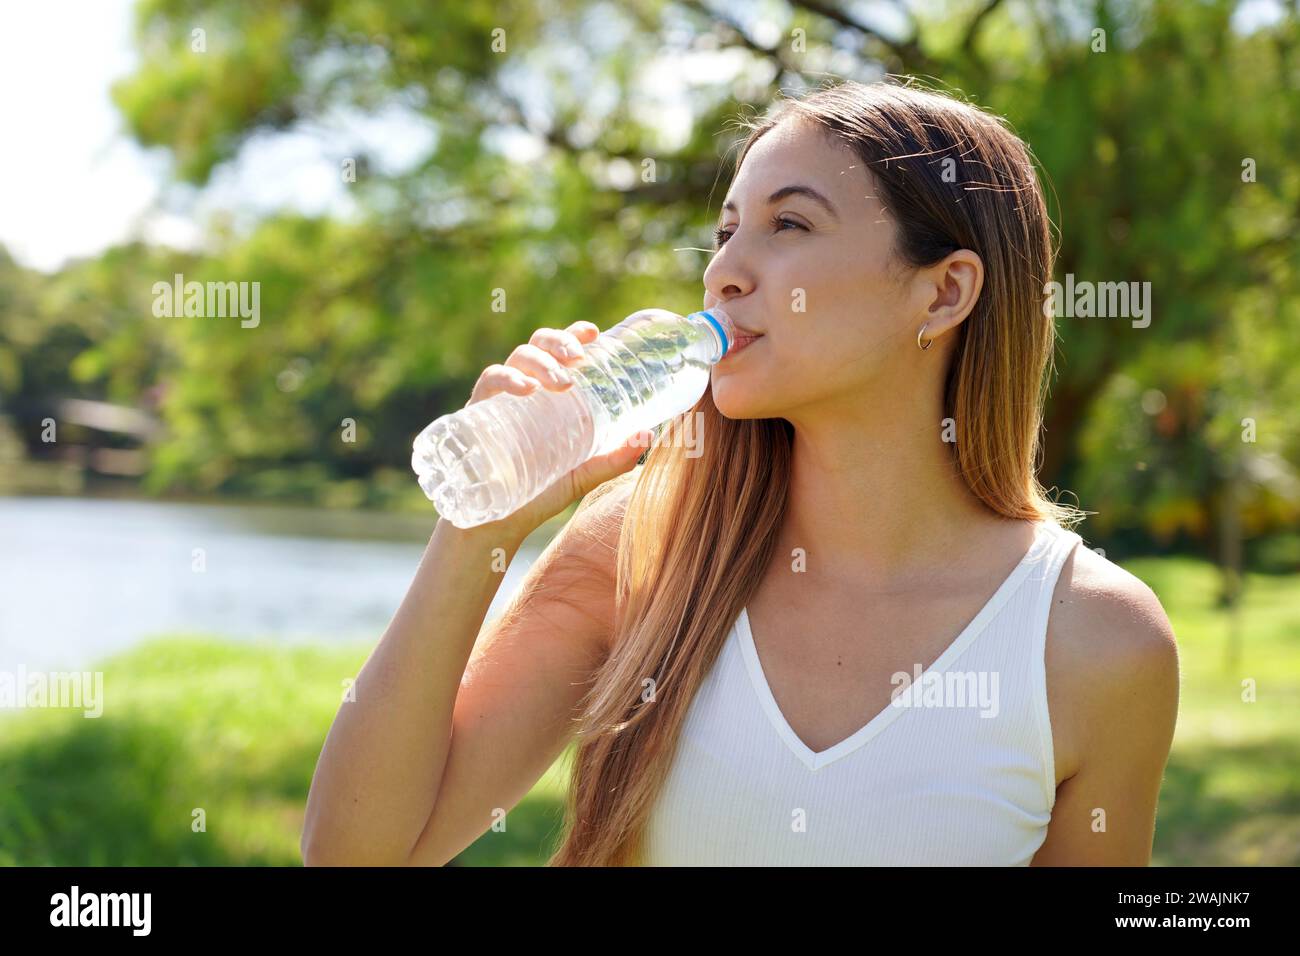 Fitness woman drinking water from bottle. Brazilian Caucasian female drinking water after exercises or sport in the park. Stock Photo